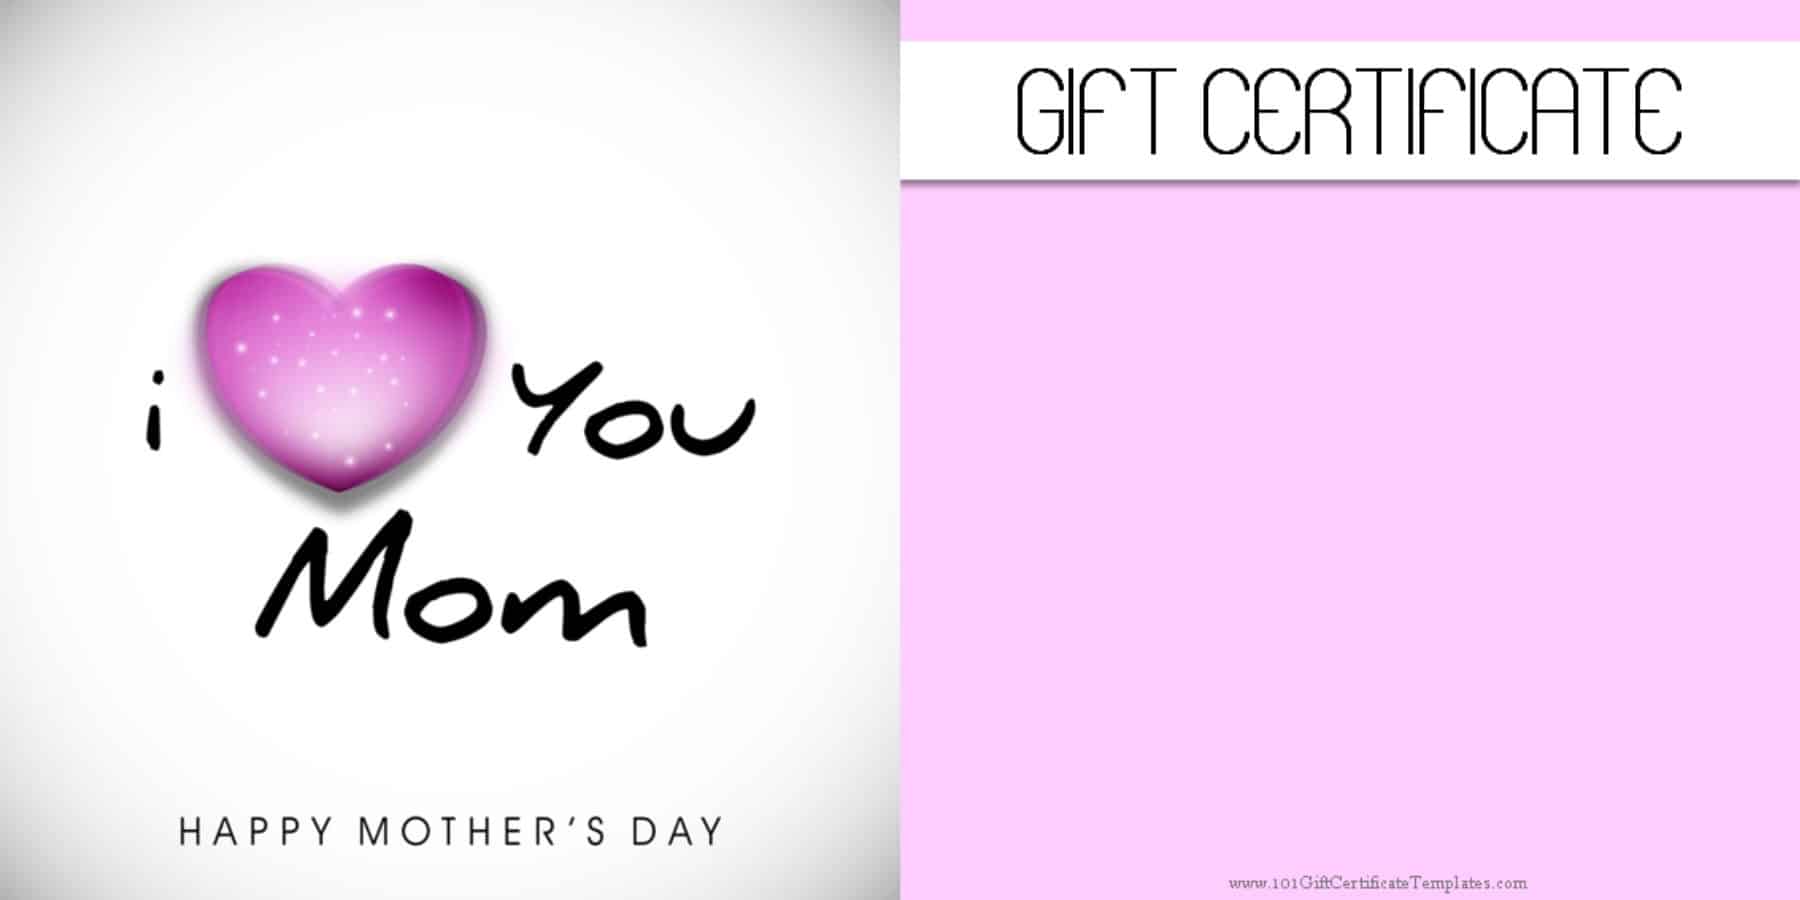 mother-s-day-gift-certificate-templates